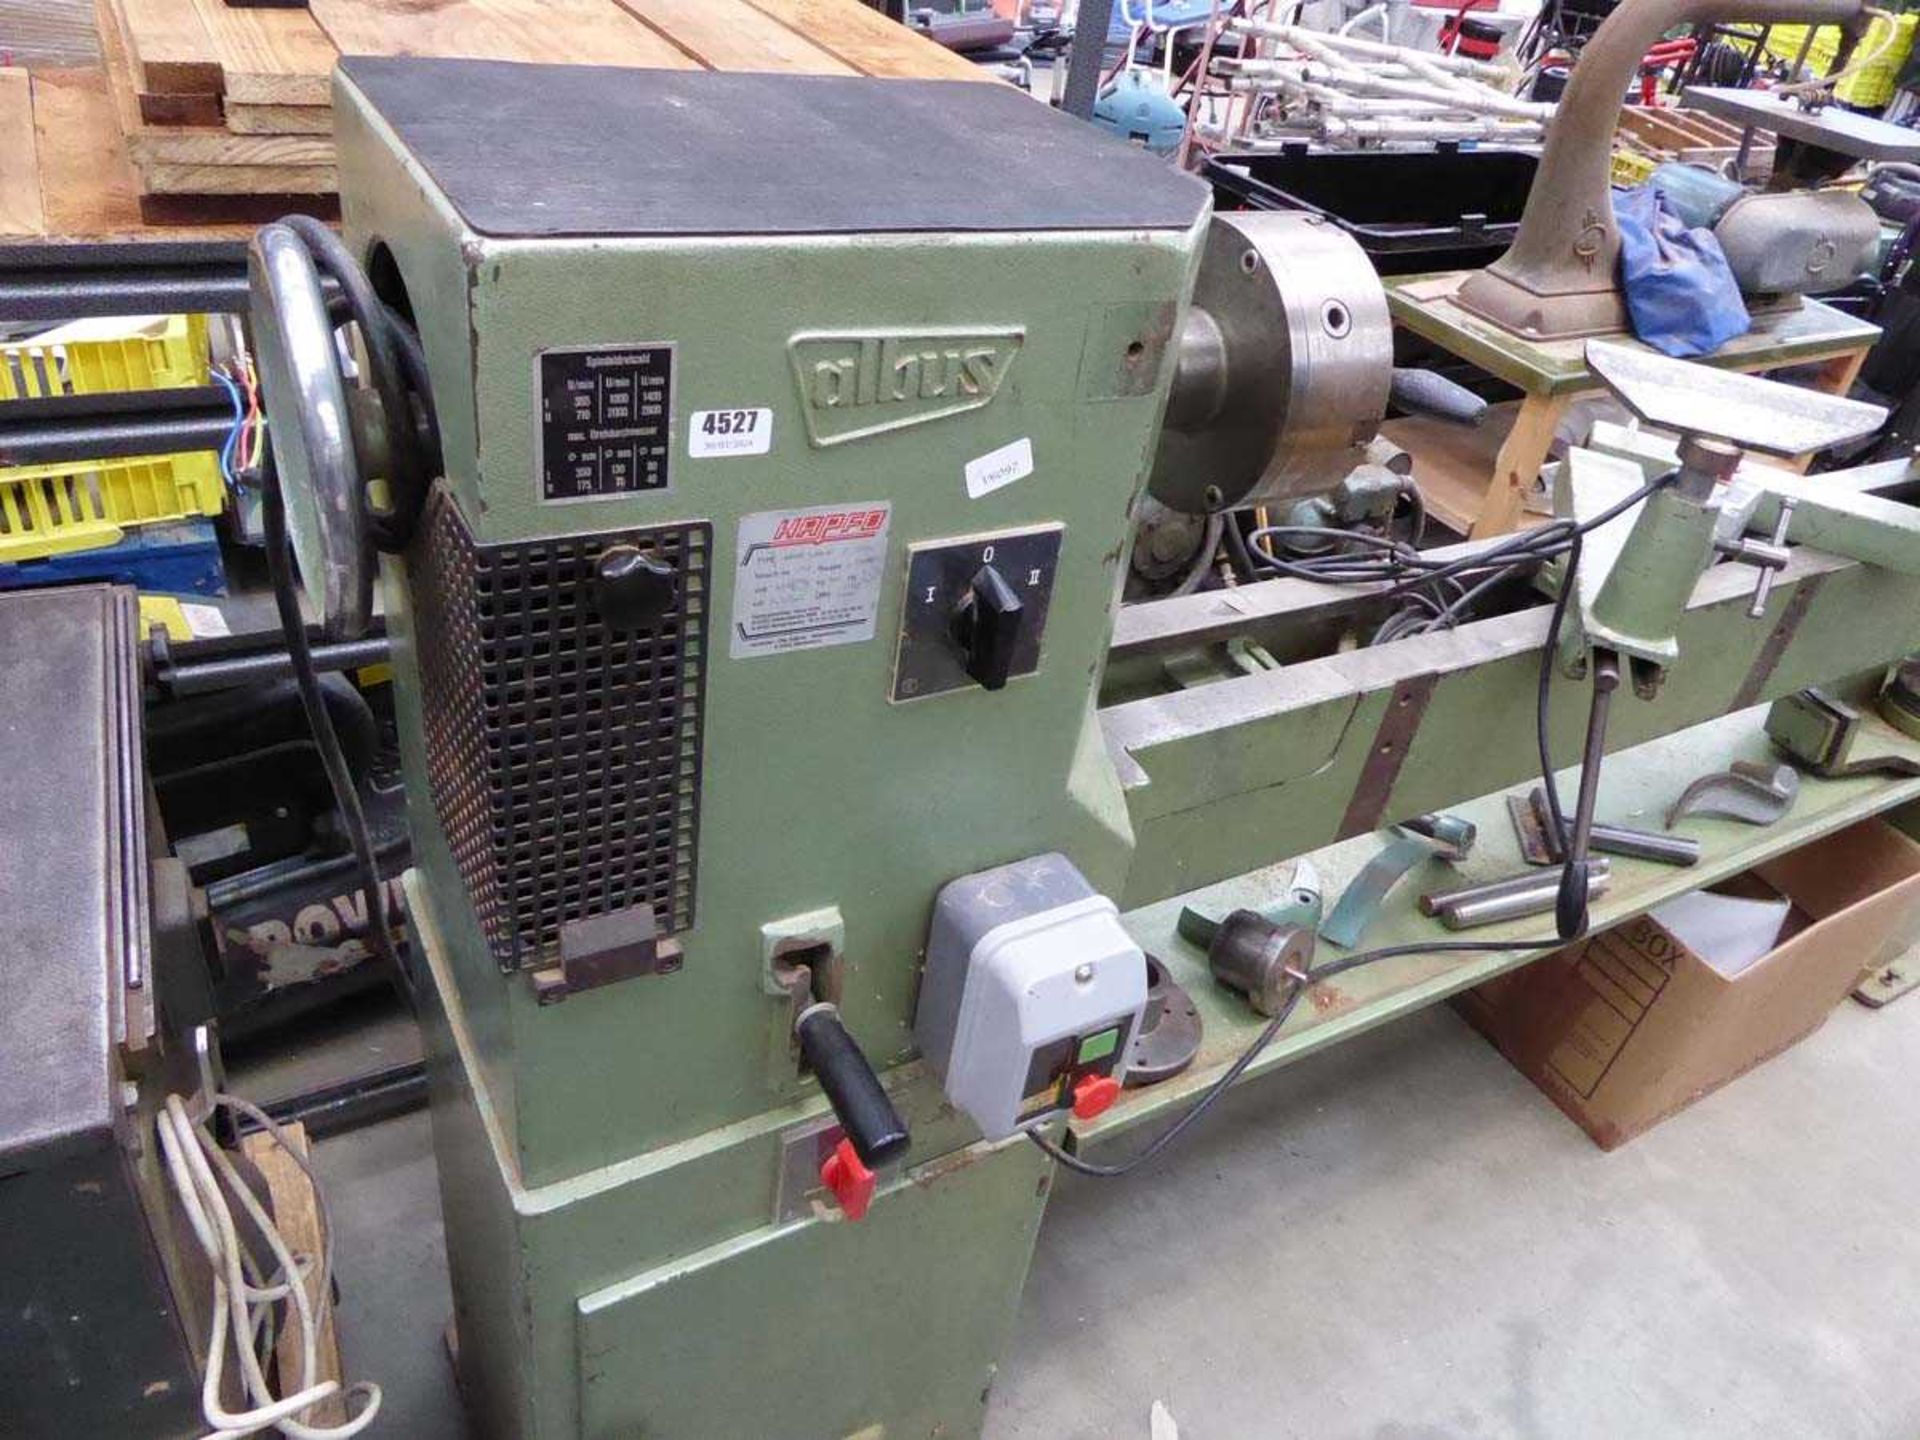 Hapco Albus Type AHDR 130-C woodturning copy lathe with 8ft - 16ft bed and barley twist tooling plus - Bild 2 aus 6